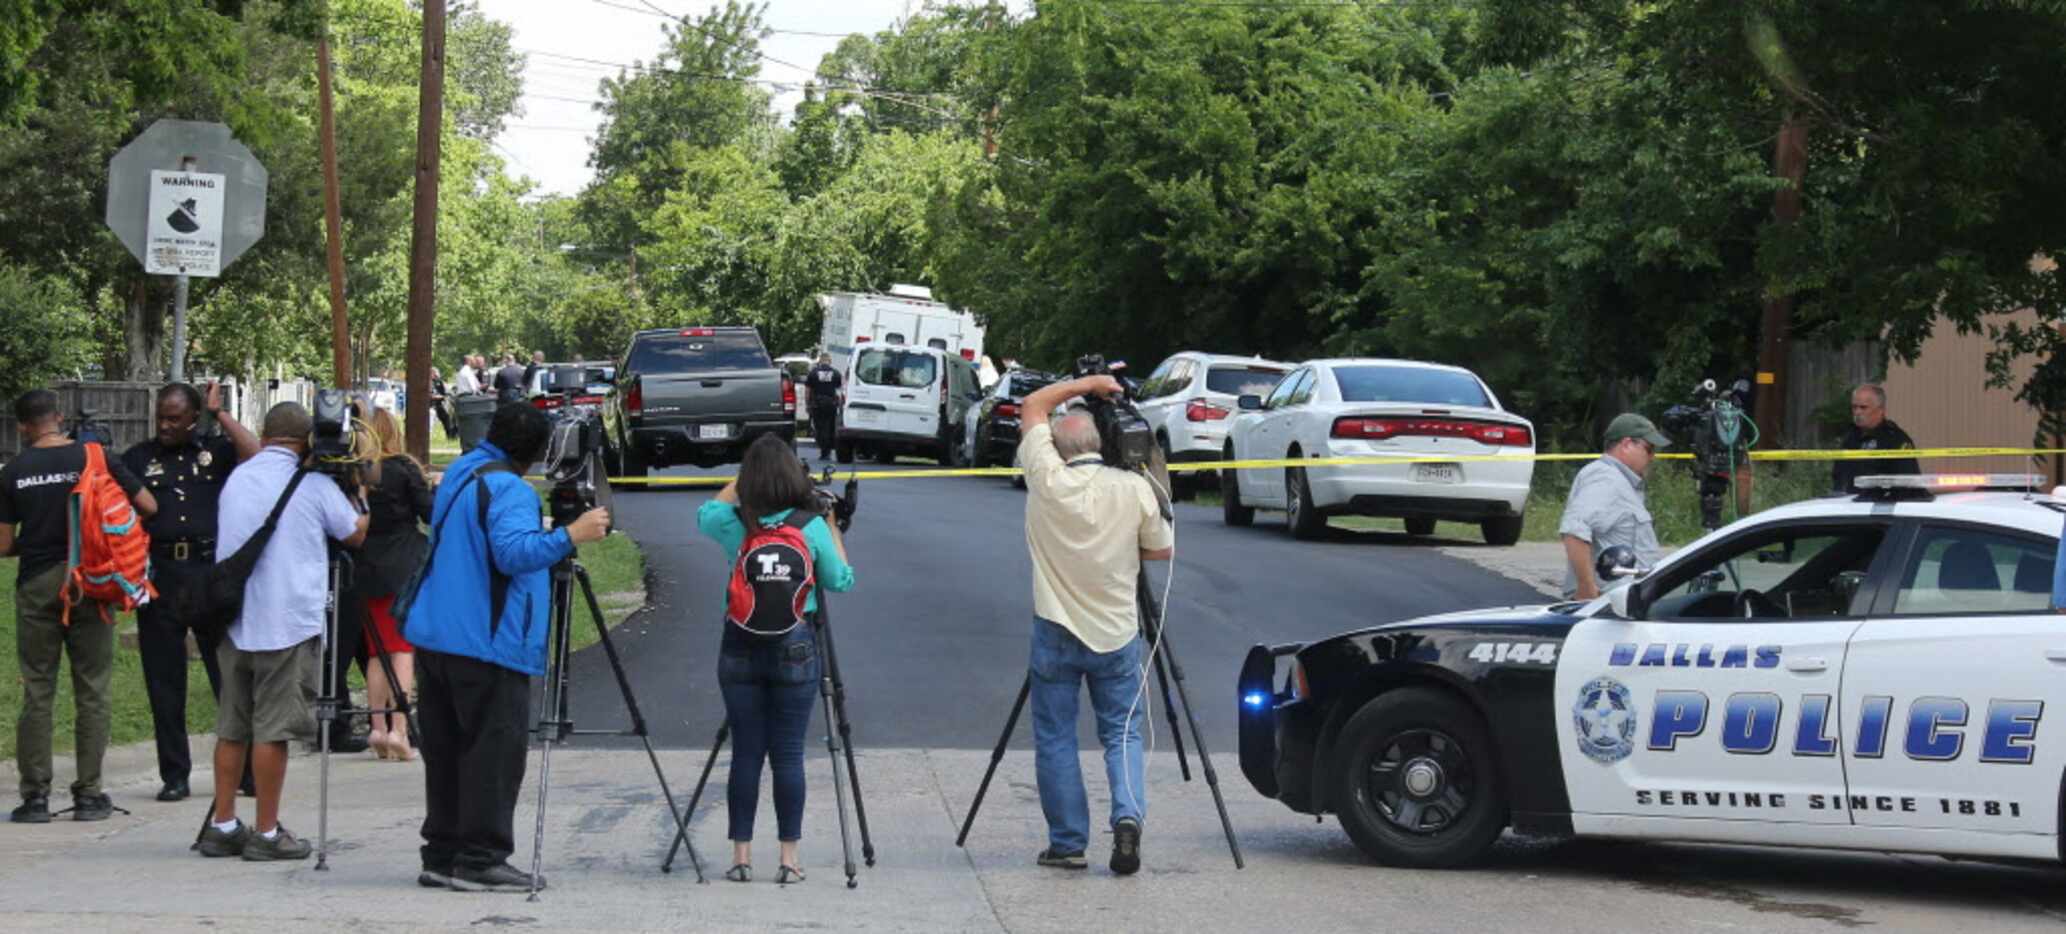 Dallas Police follow up at the scene of an officer-involved shooting at 8300 Reva Street in...